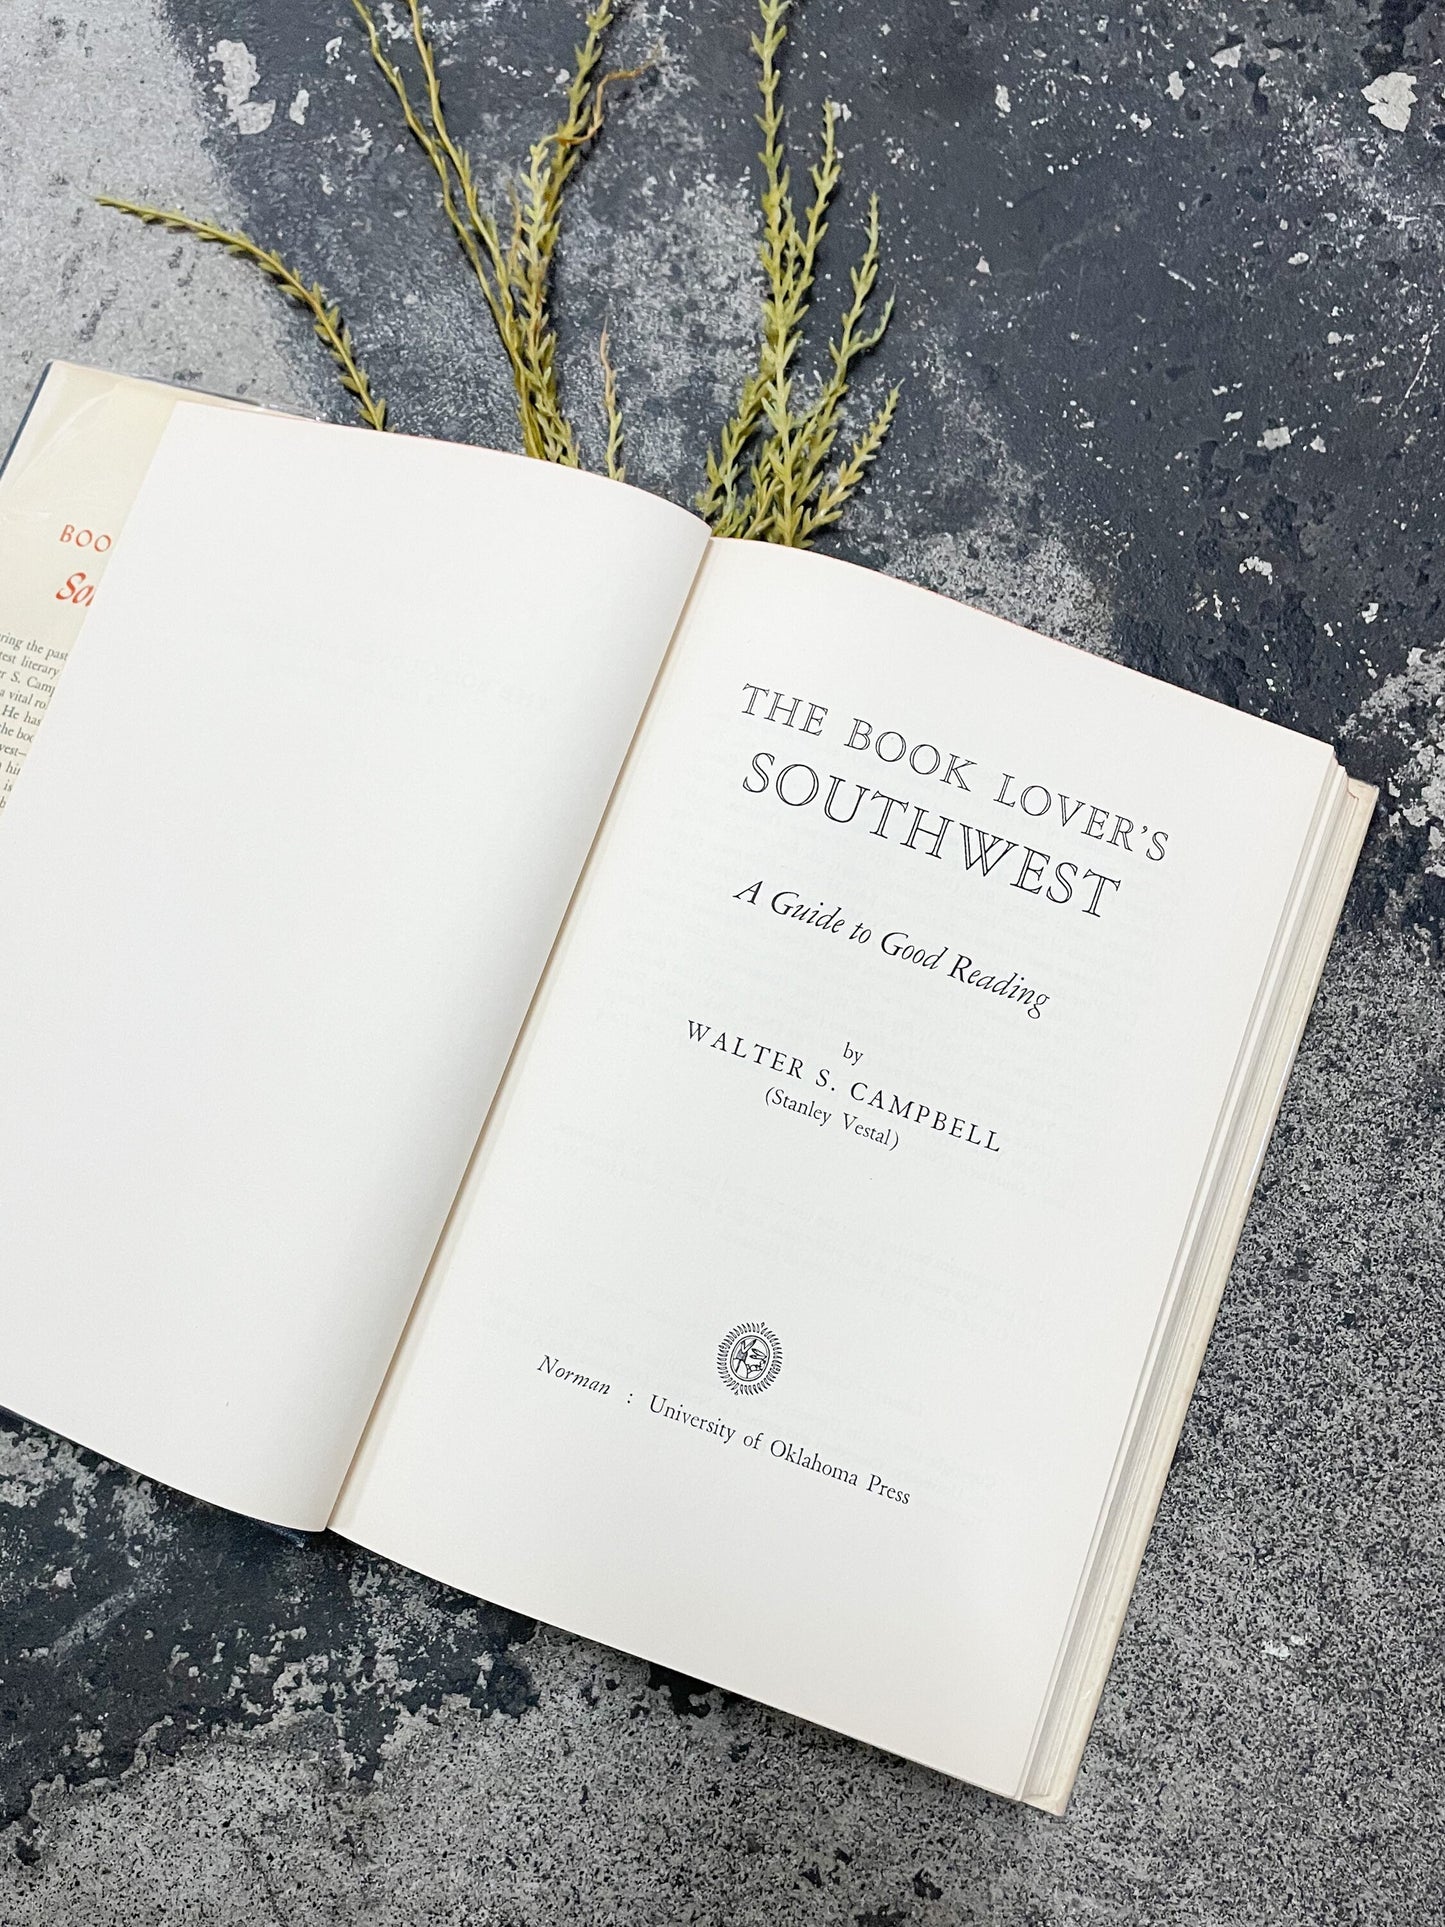 First Edition Book, The Book Lover's Southwest: A Guide to Good Reading by Walter S. Campbell